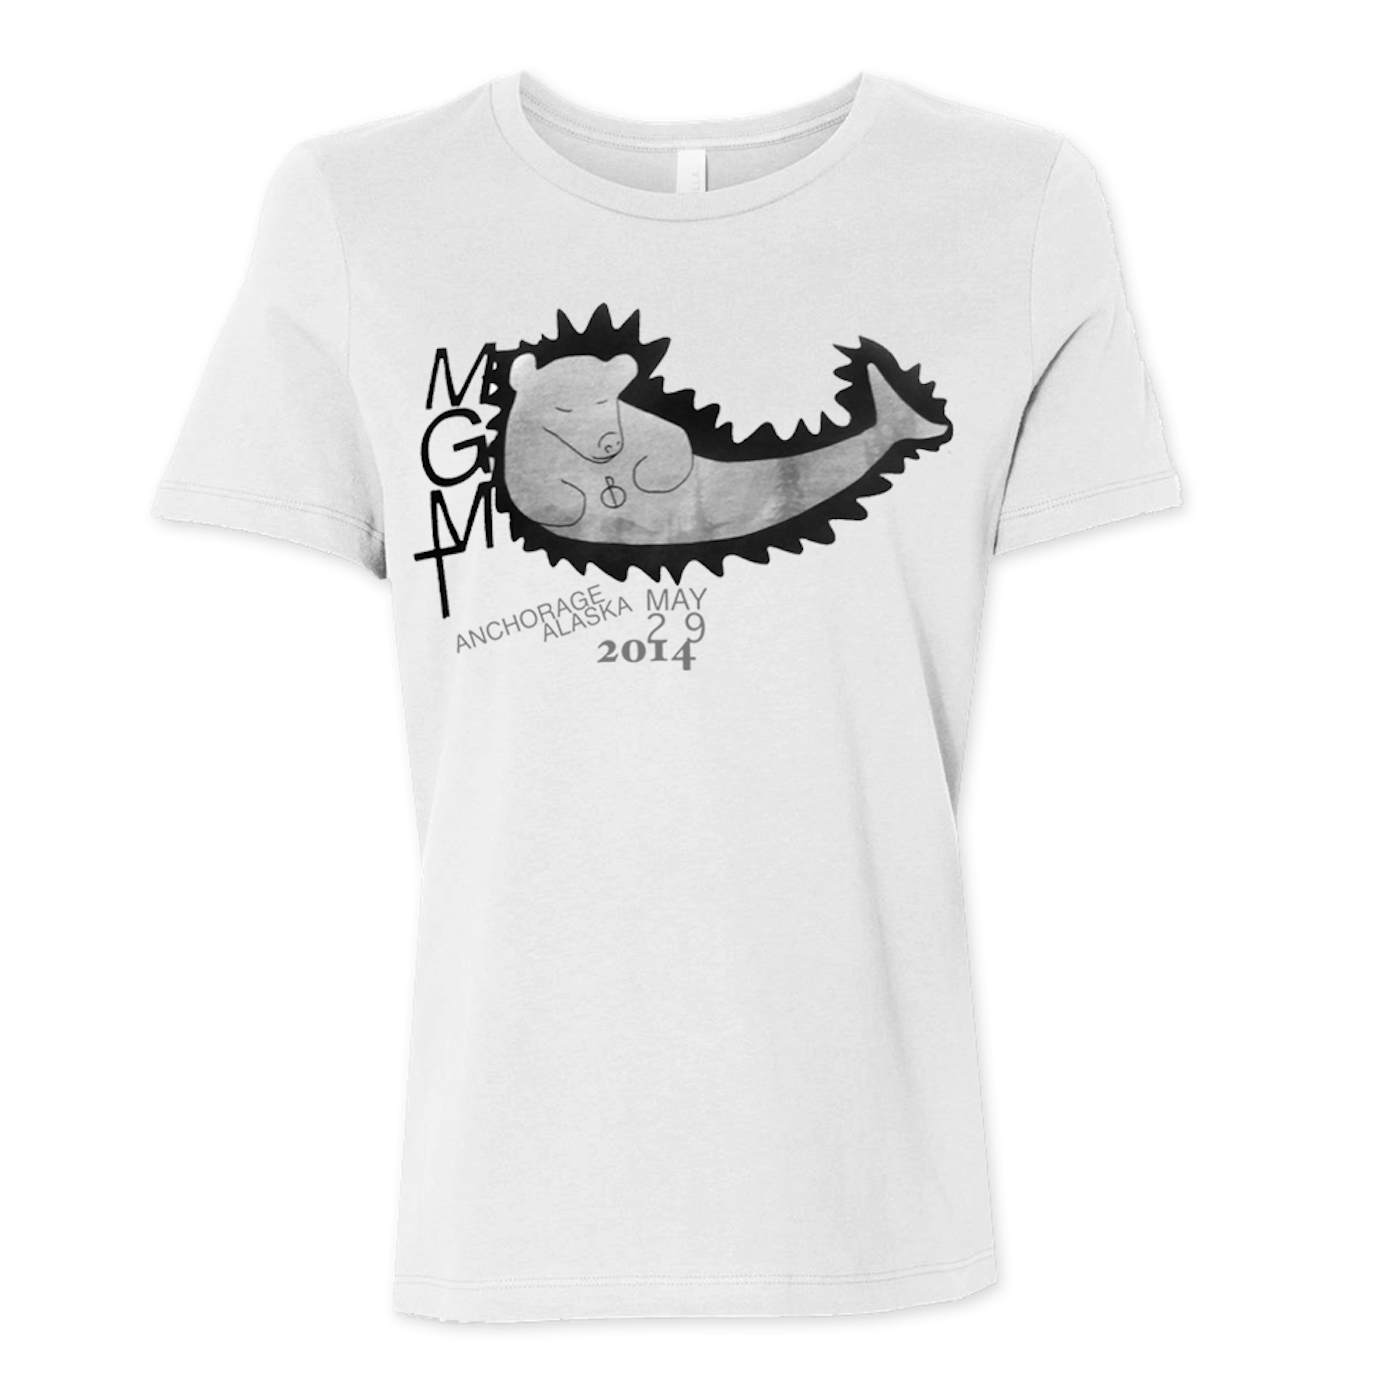 MGMT Girl's Anchorage '14 T-shirt